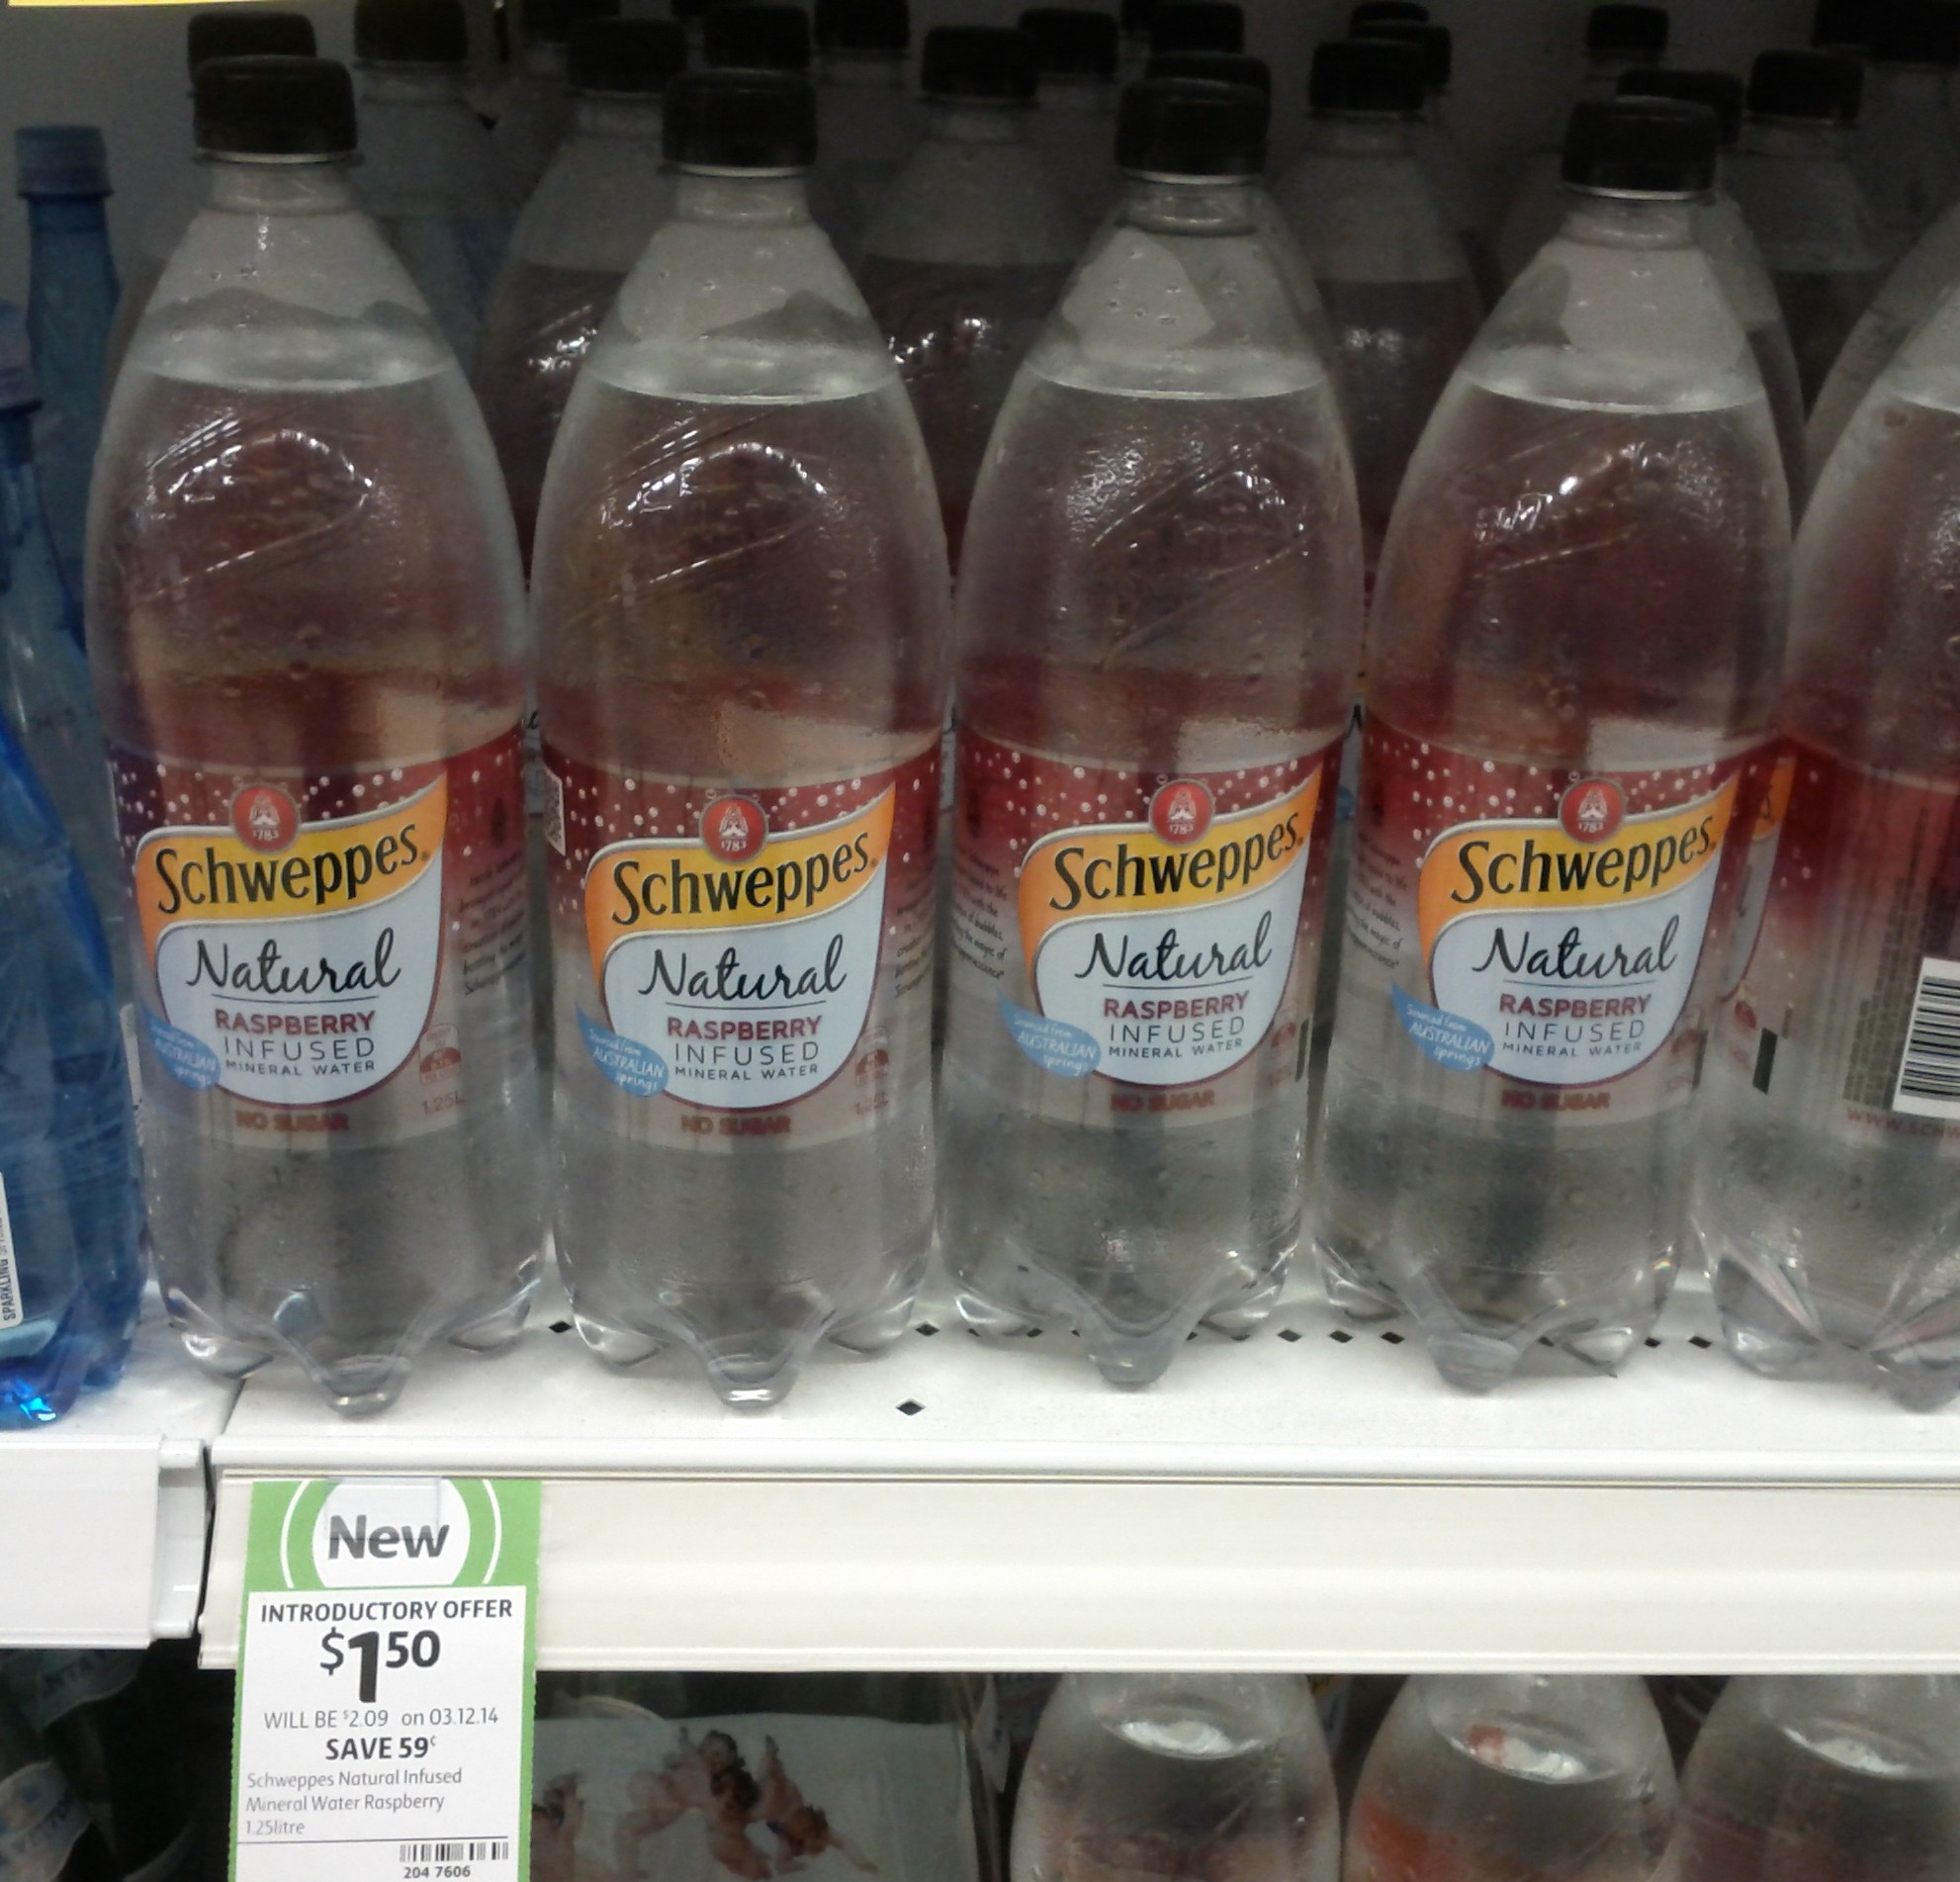 Schweppes 1.25L Natural Raspberry Infused